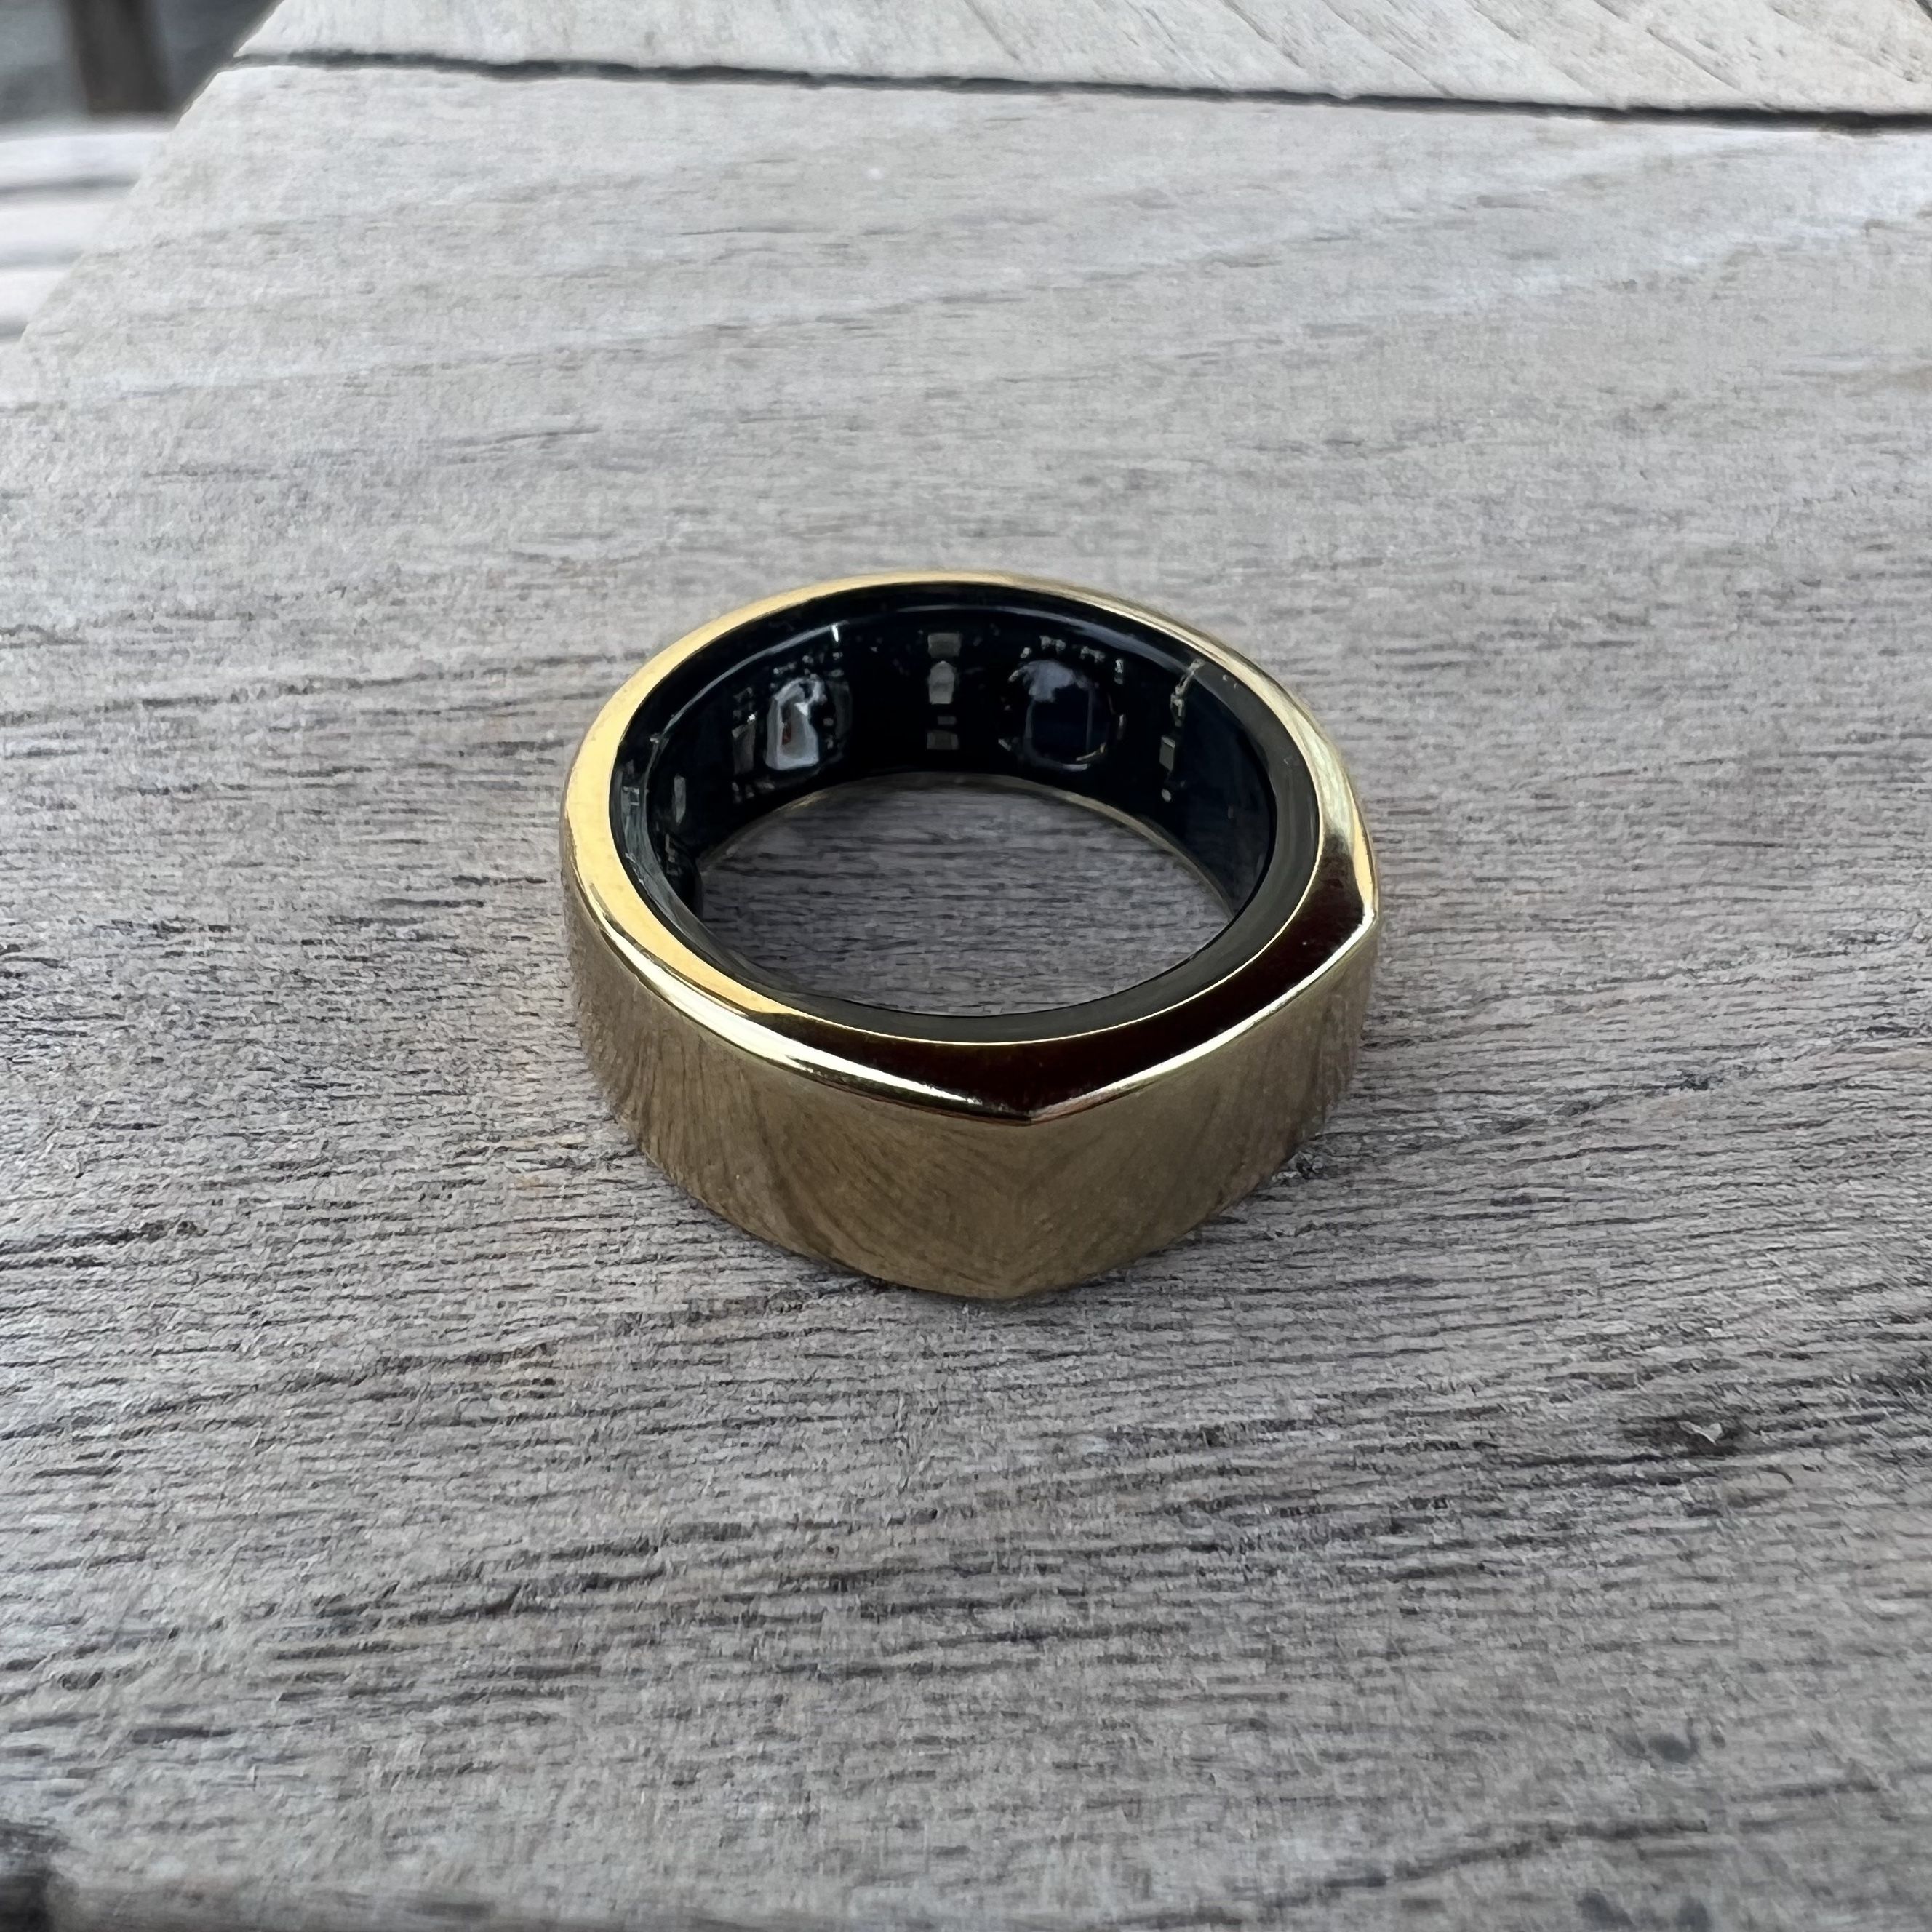 Oura Ring Generation 3 review: a relationship for the long term - The Verge